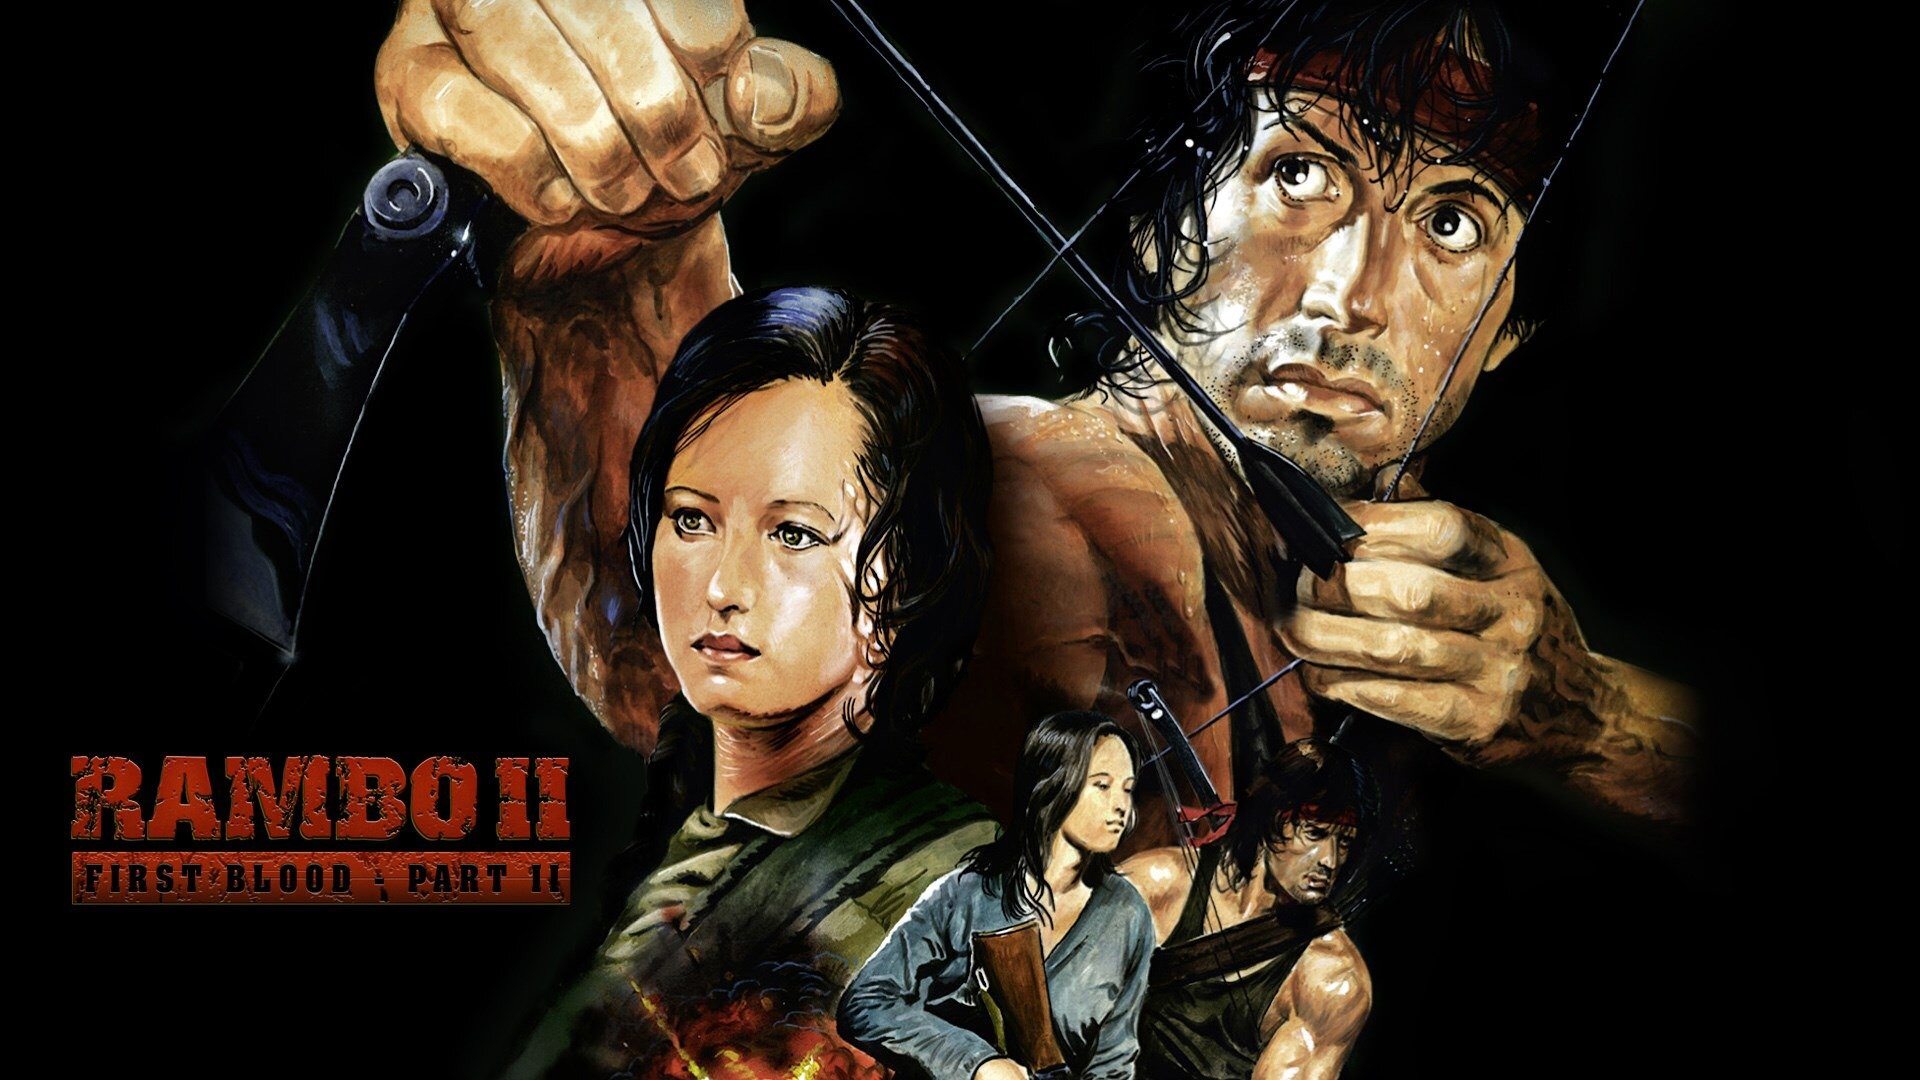 42-facts-about-the-movie-rambo-first-blood-part-ii